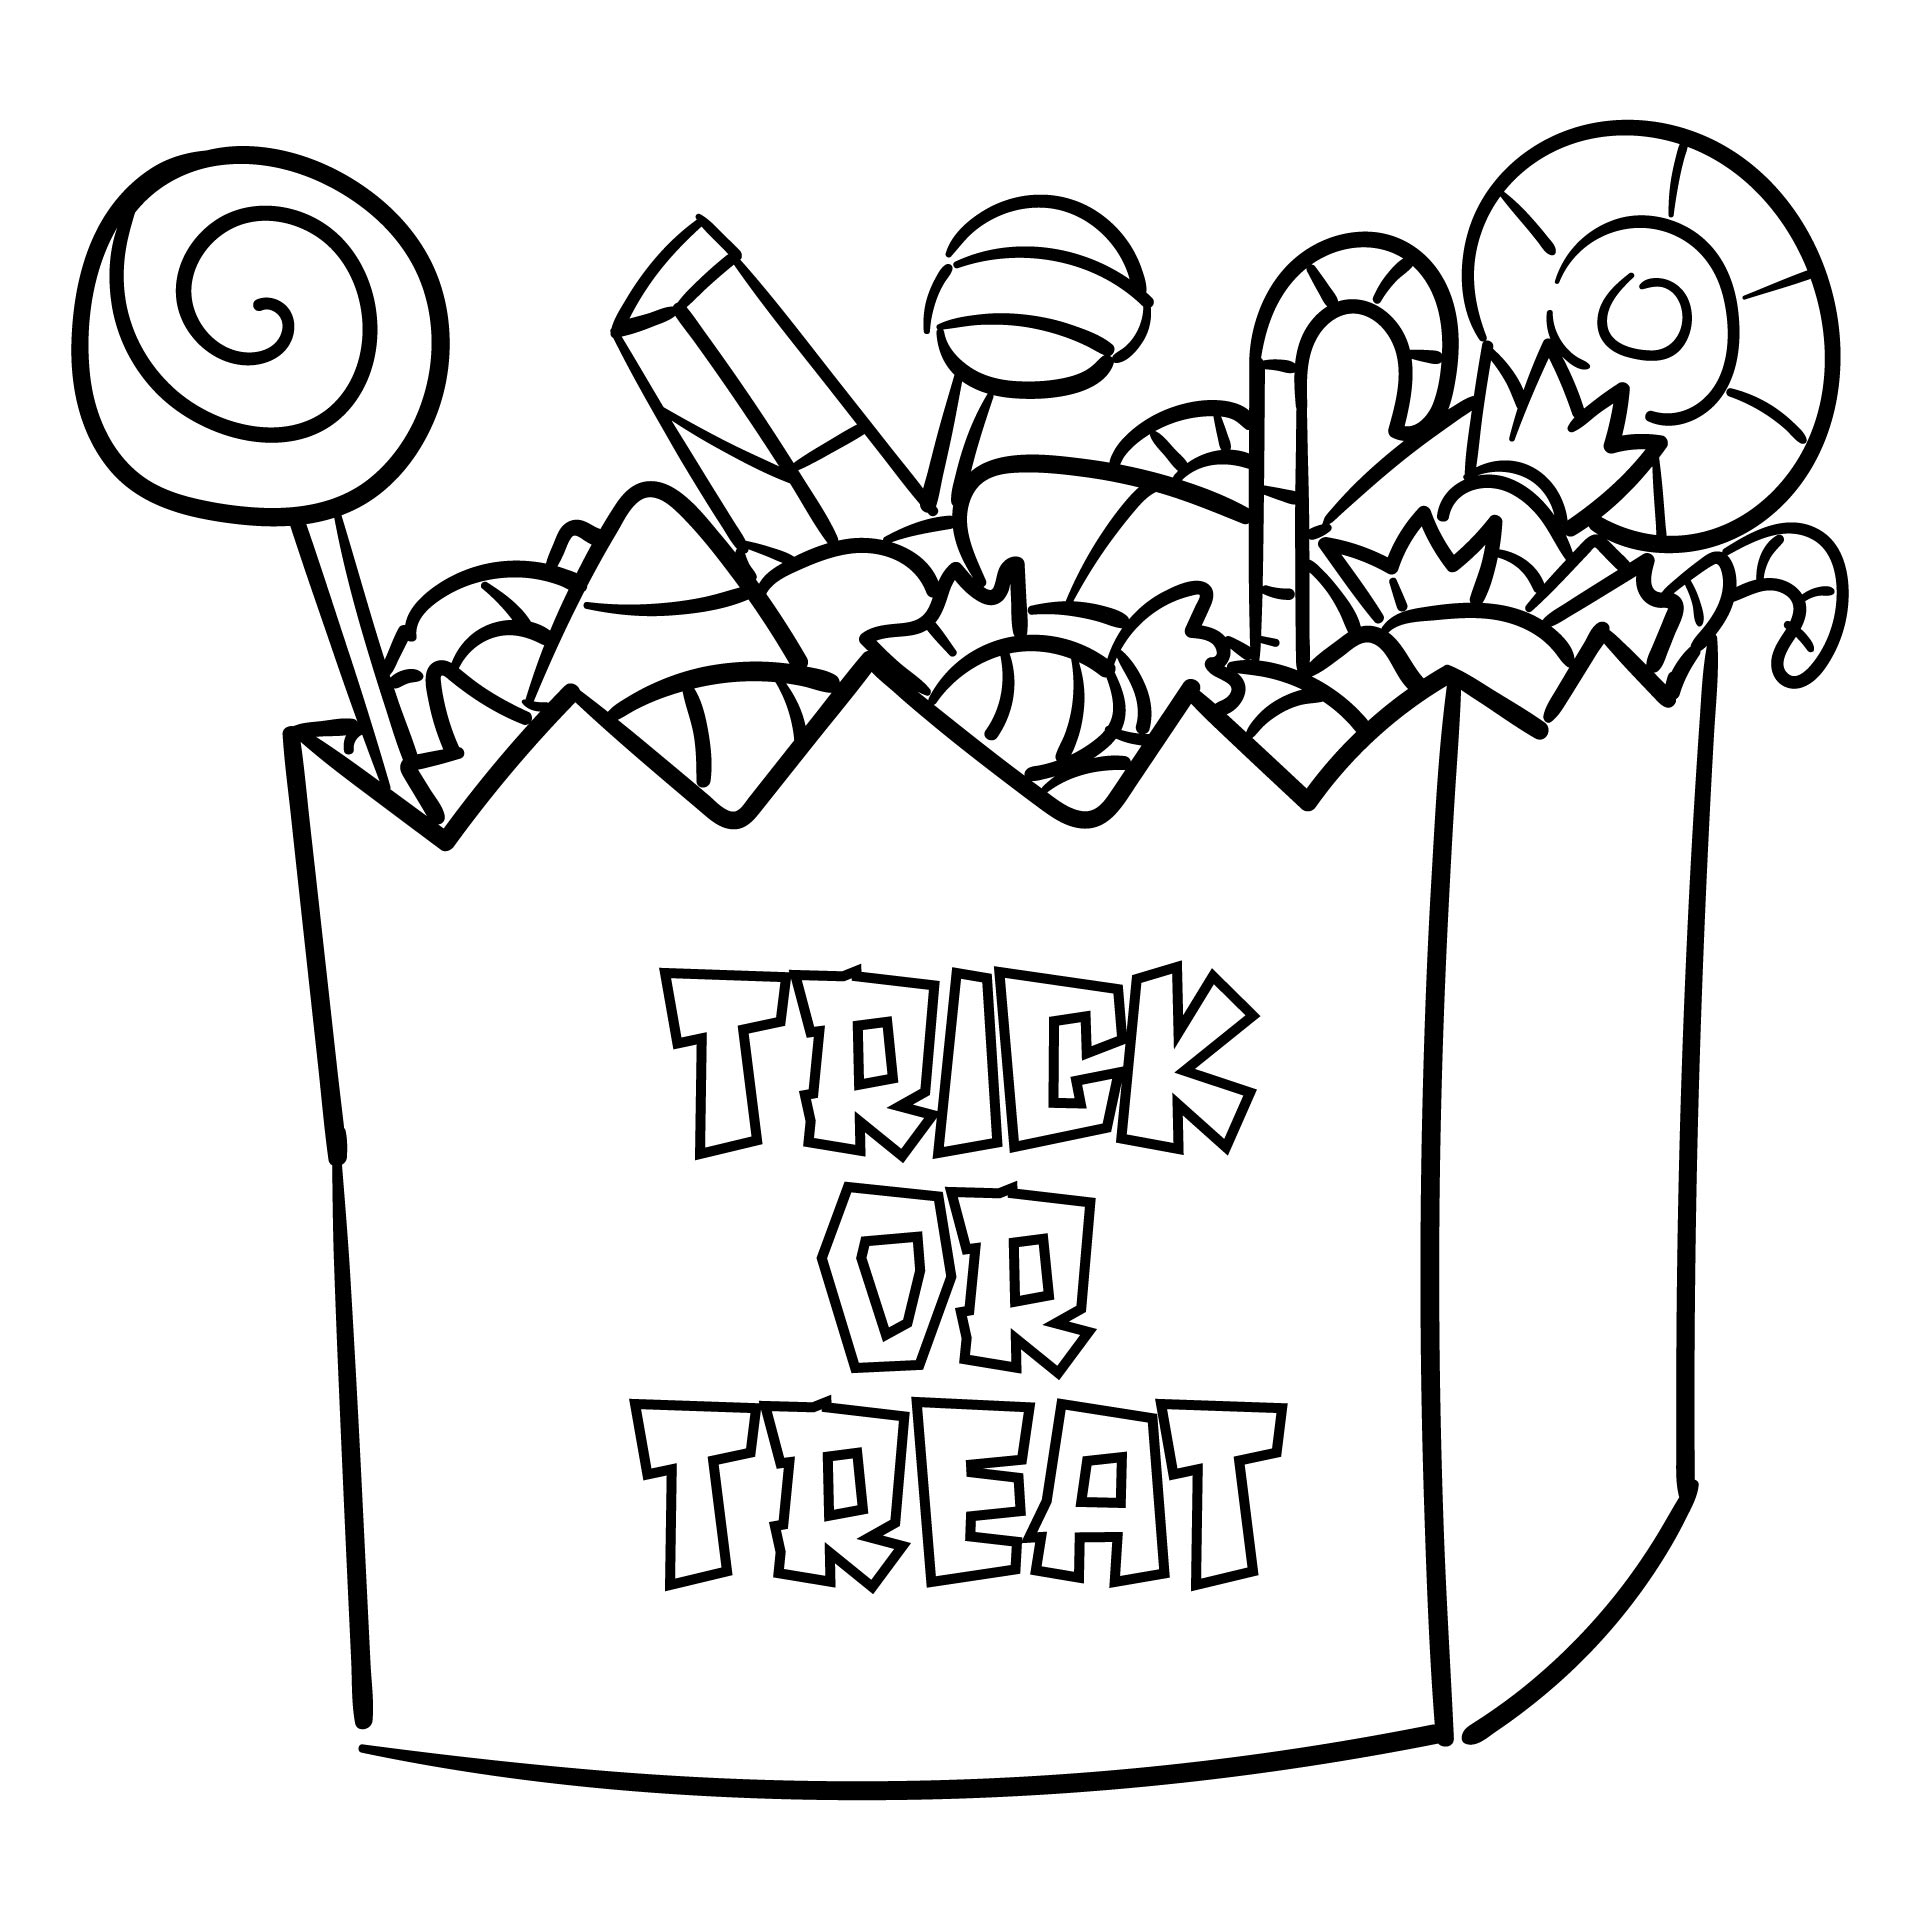 15 Best Halloween Candy Coloring Pages Printable PDF for Free at Printablee